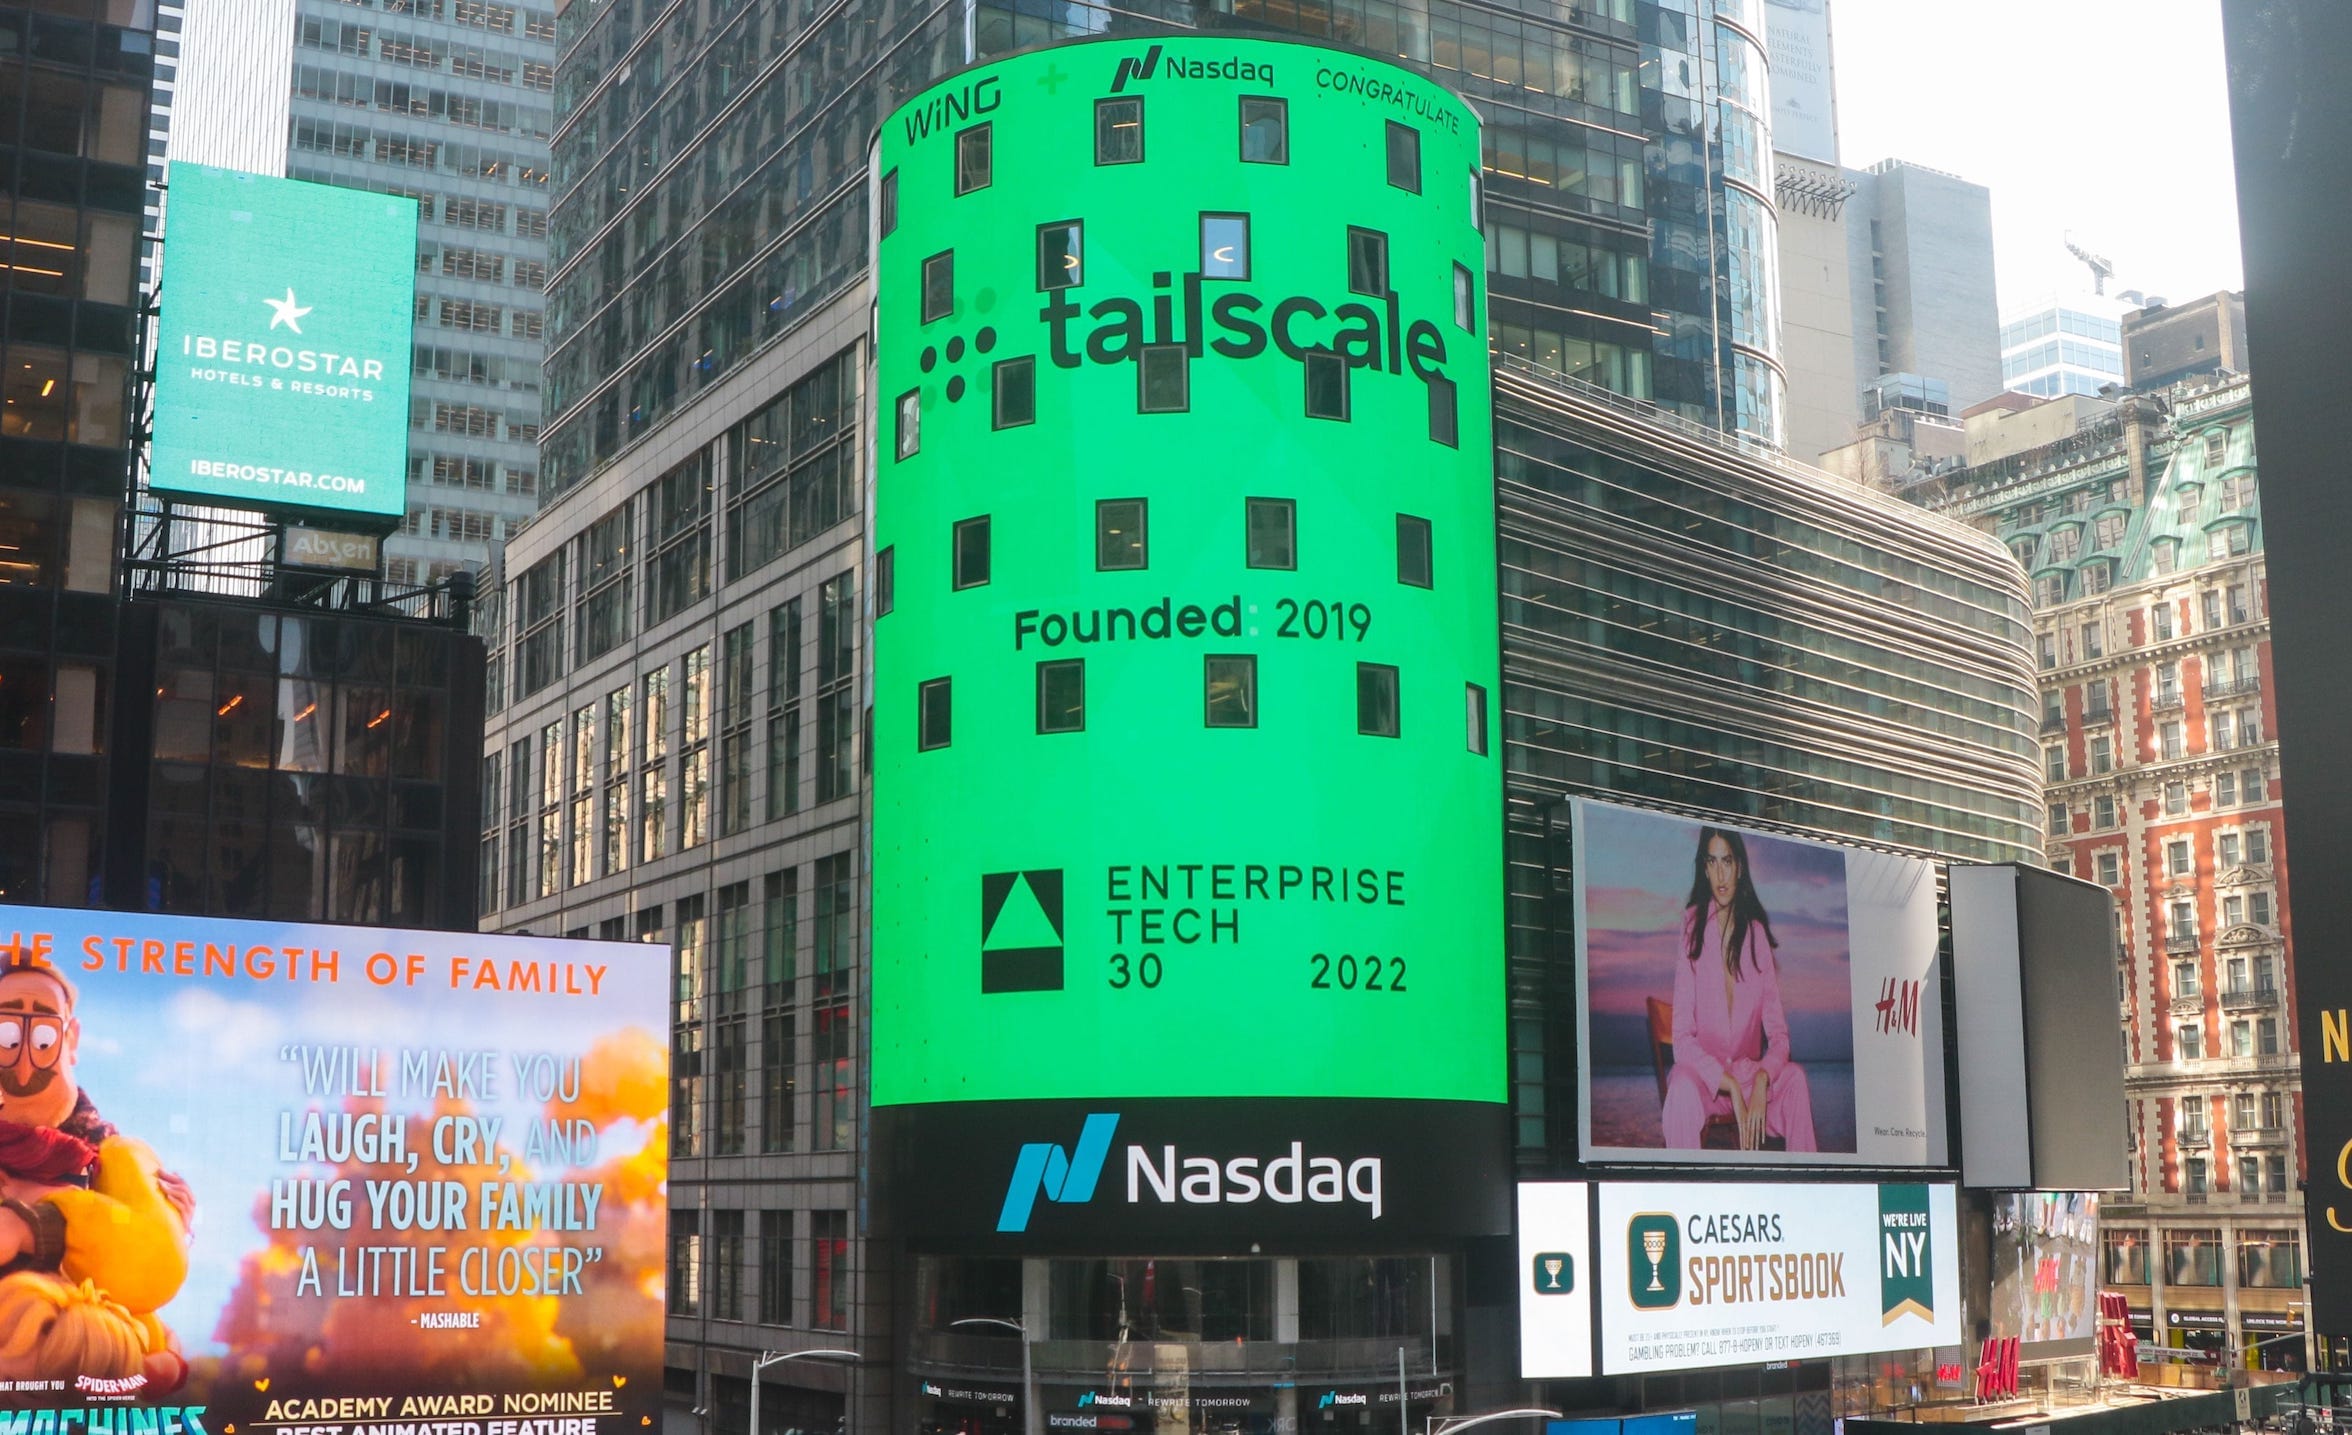 Tailscale featured on the Nasdaq Times Square billboard